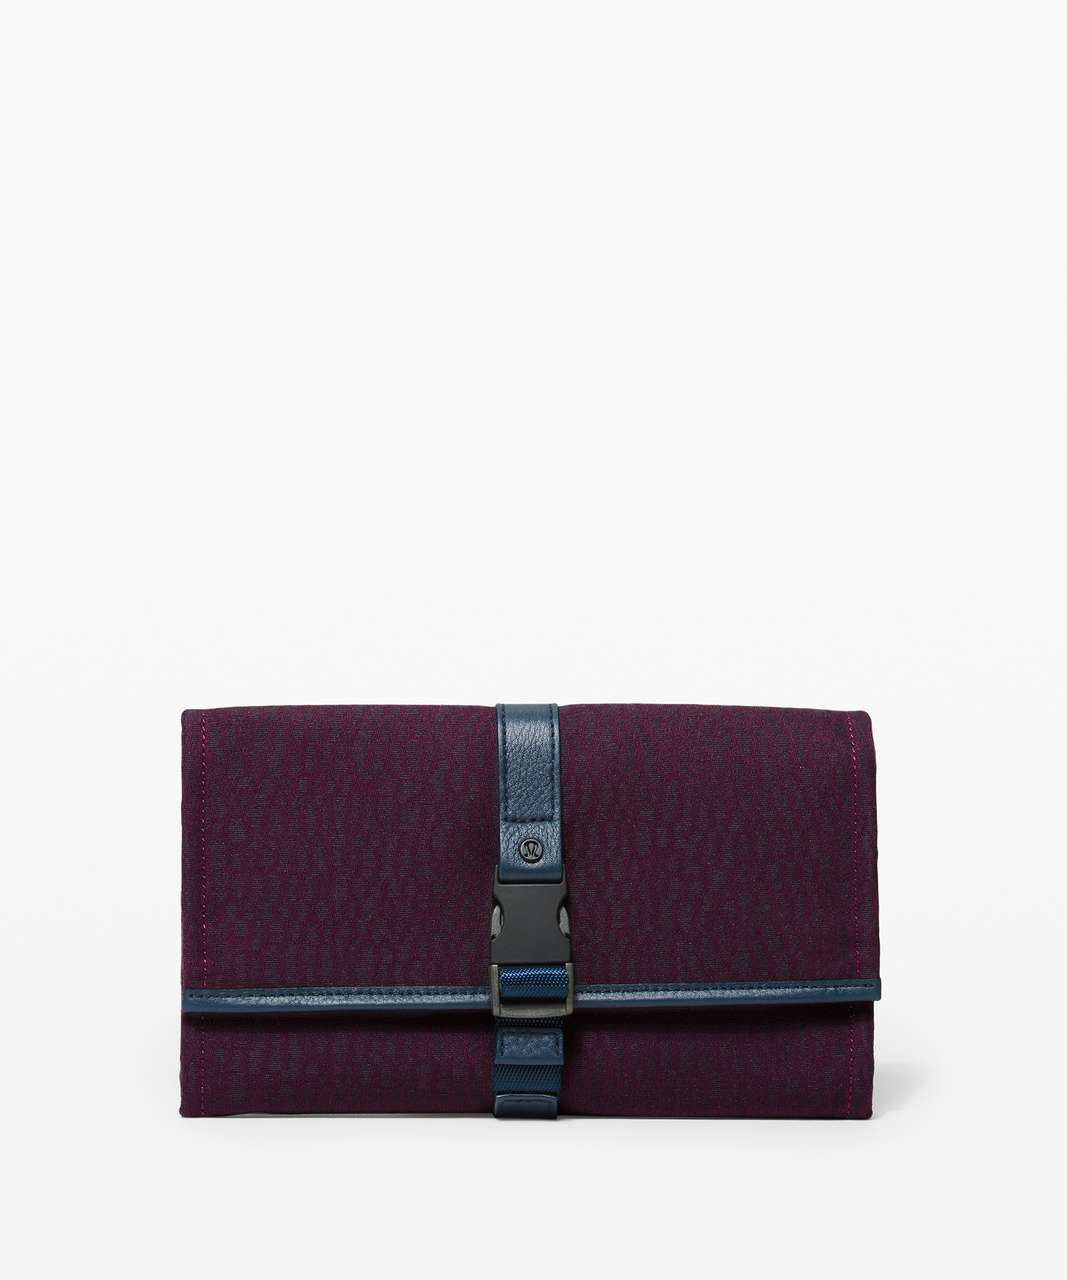 Lululemon Test of Time Travel Wallet - Stacked Jacquard Black Cherry Nocturnal Teal